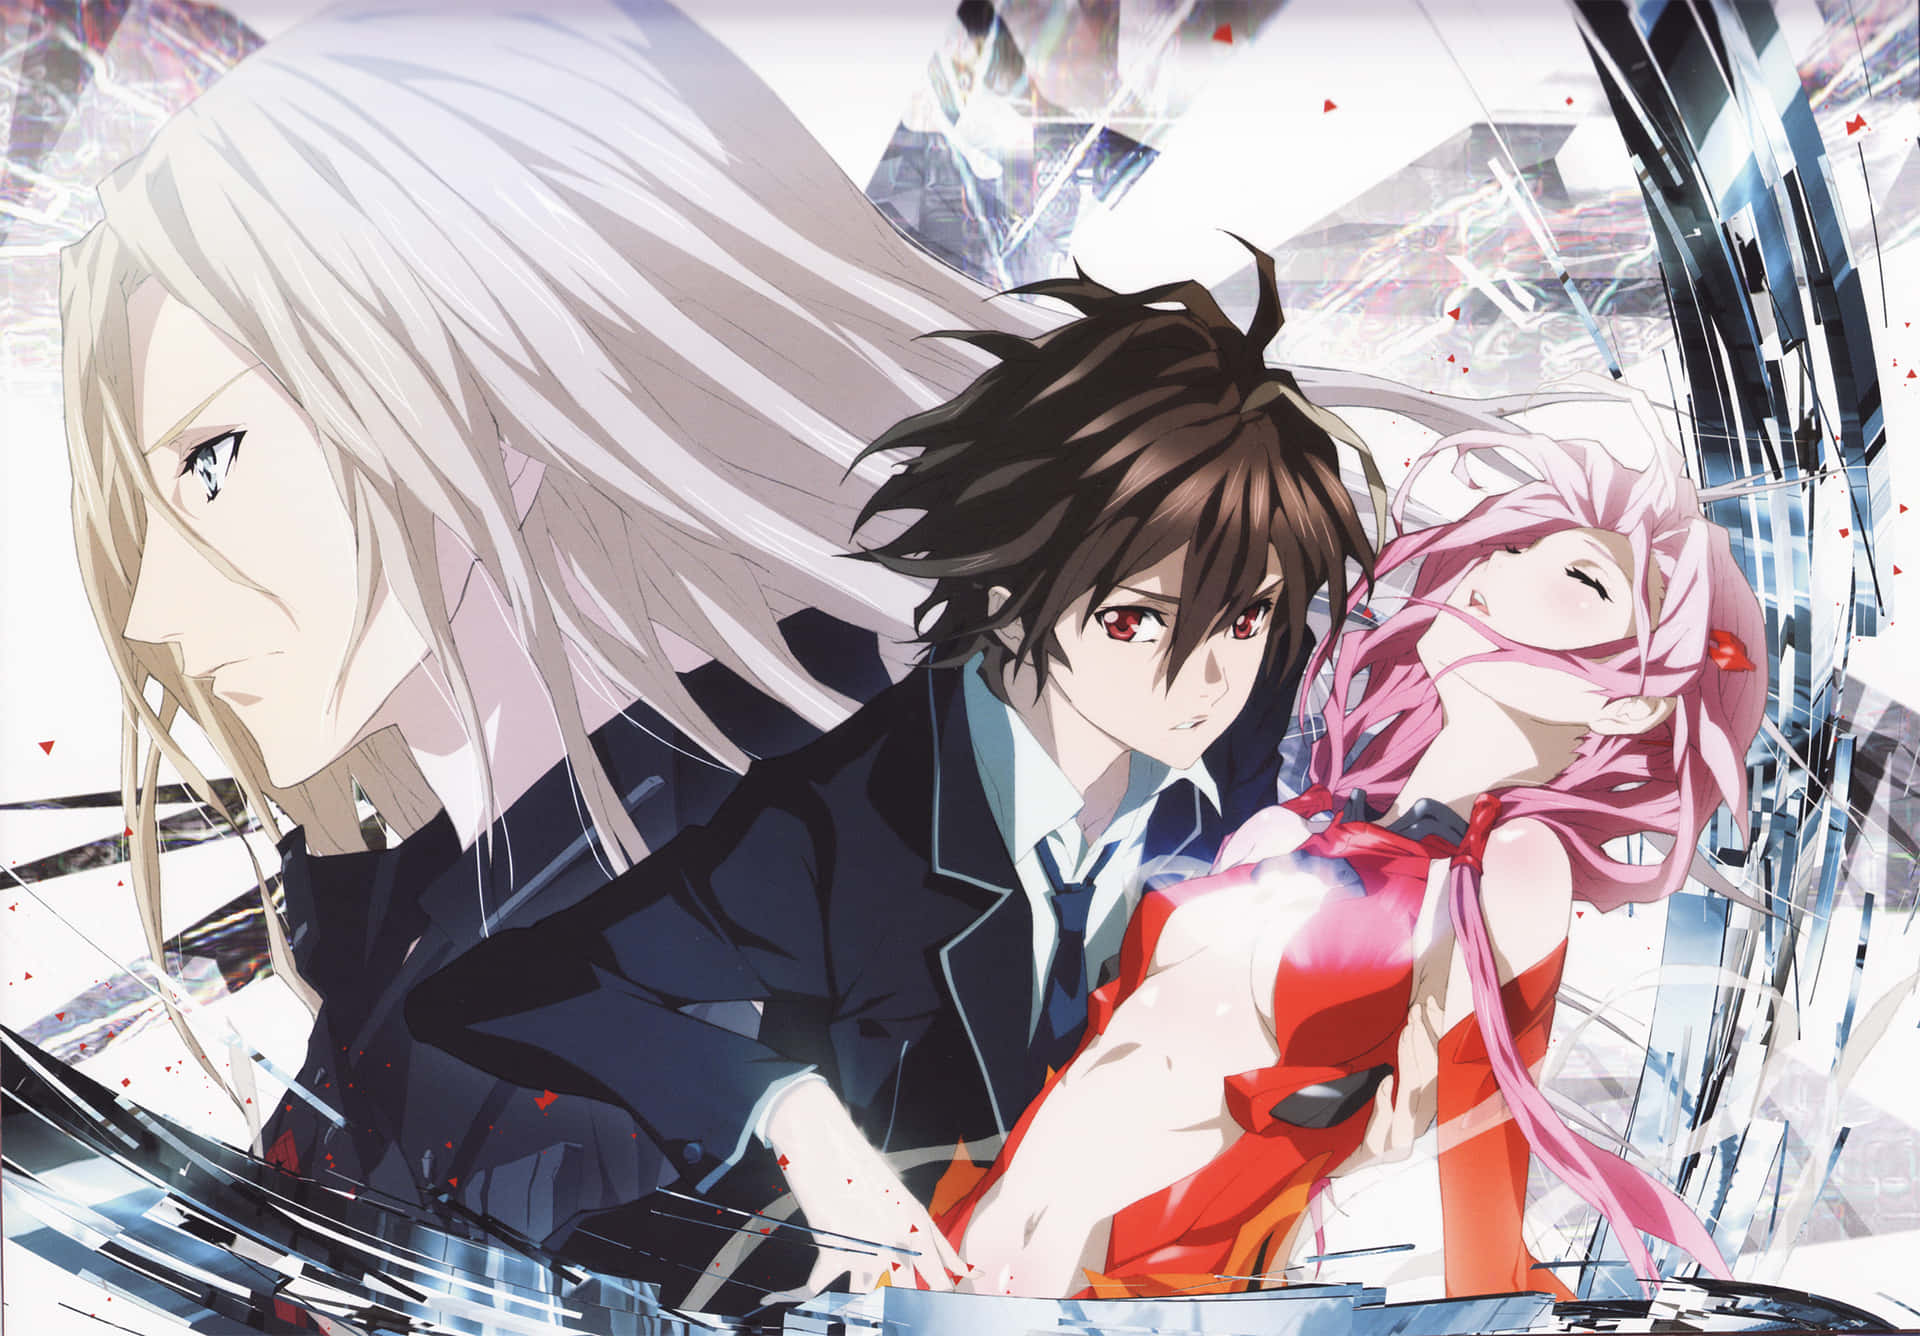 Feel the power of the King in Guilty Crown